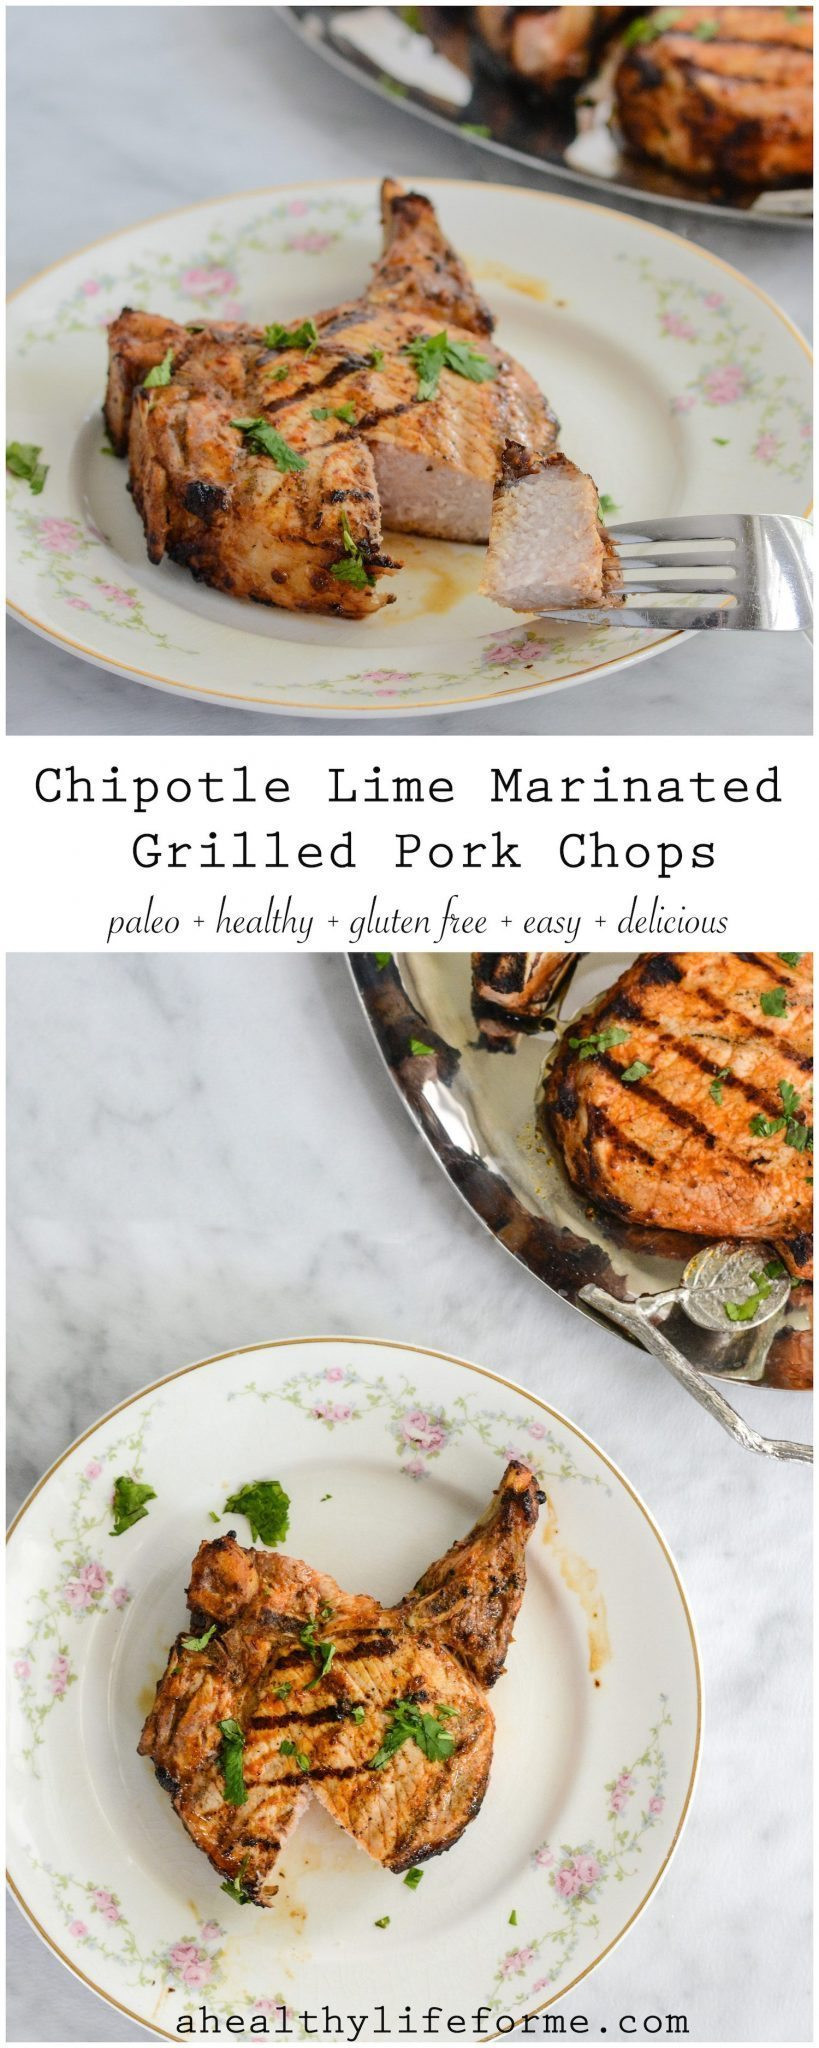 Are Pork Chops Healthy For You
 Chipotle Lime Marinated Grilled Pork Chops A Healthy